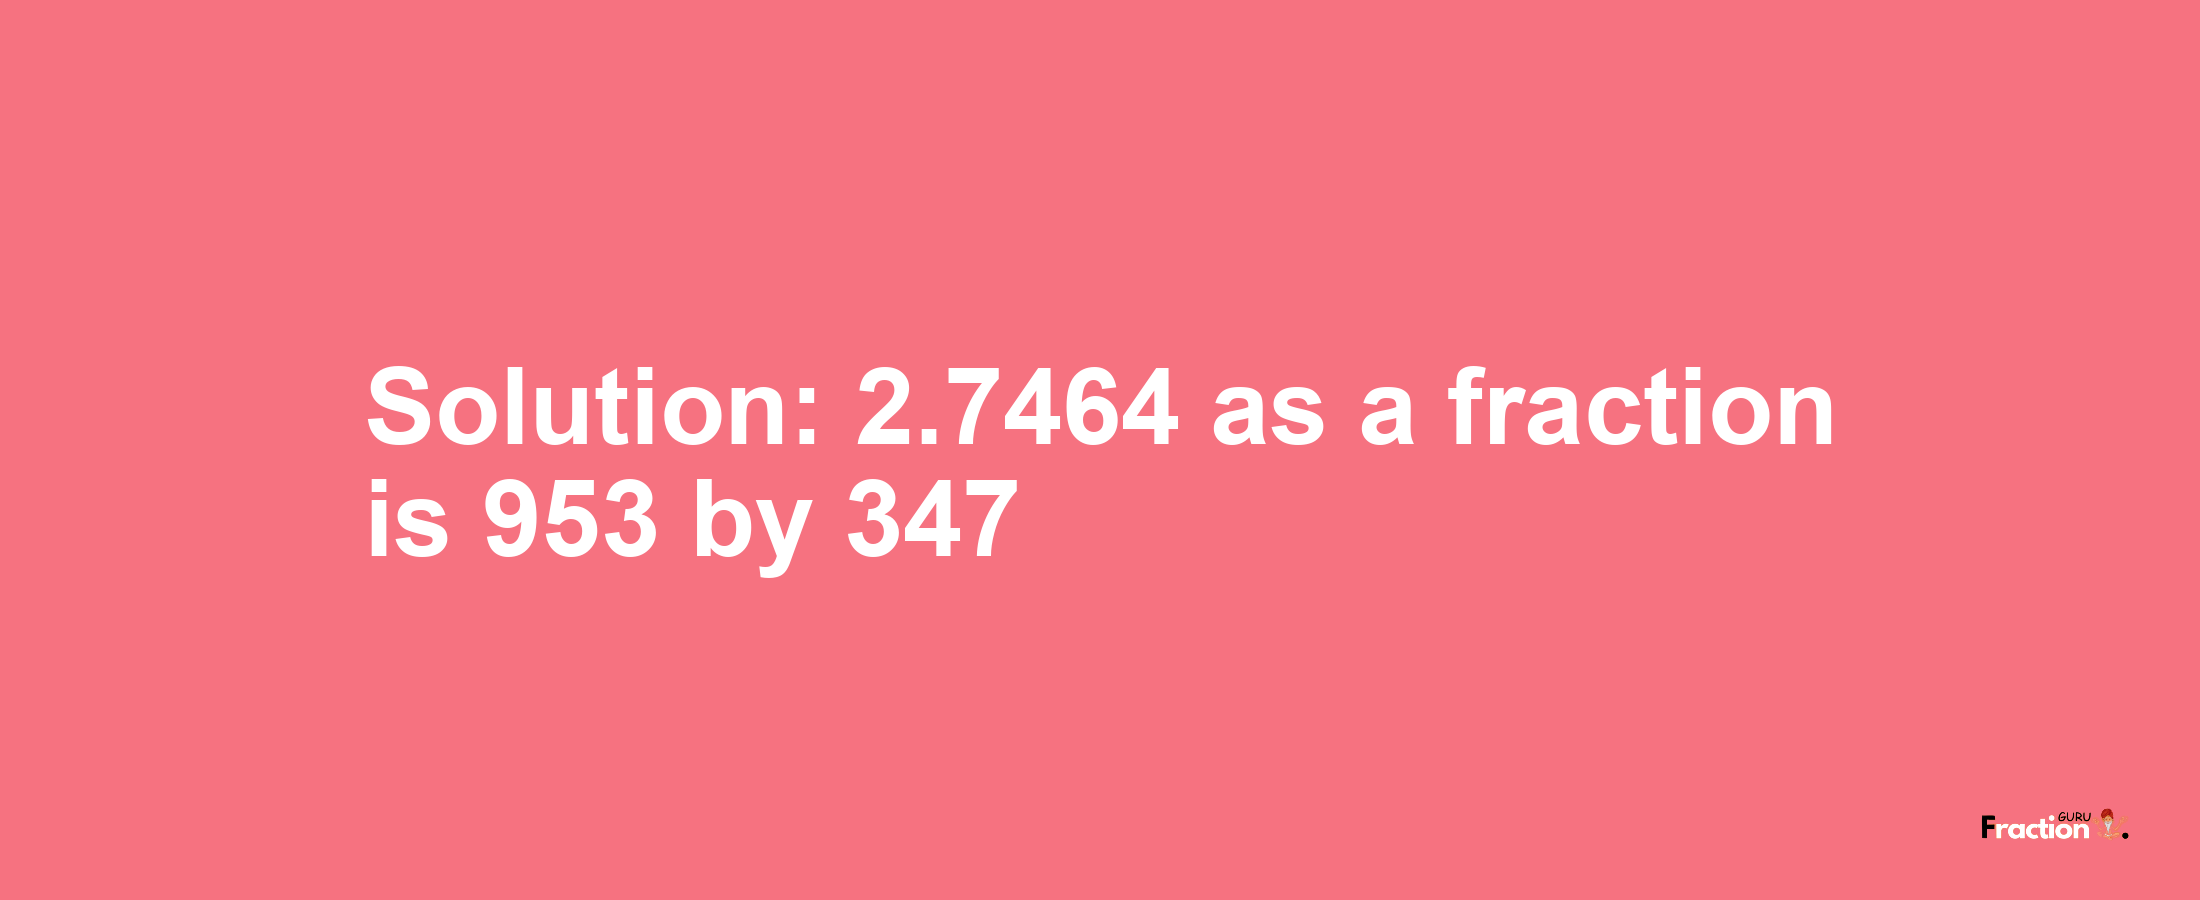 Solution:2.7464 as a fraction is 953/347